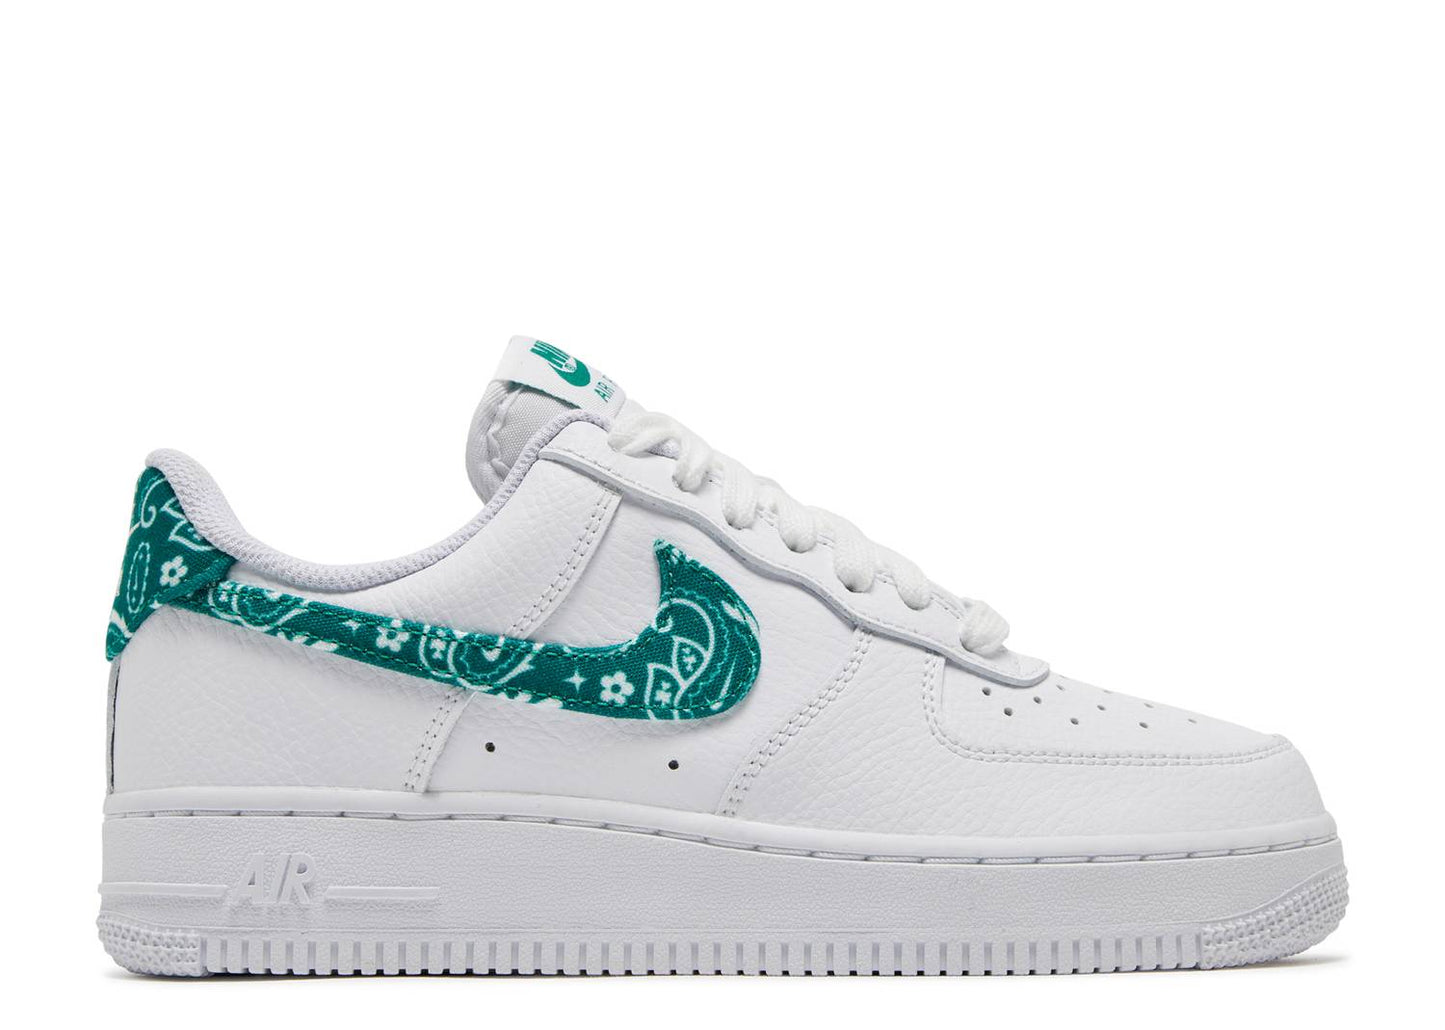 WMNS Air Force 1 Low Paisley "Green"